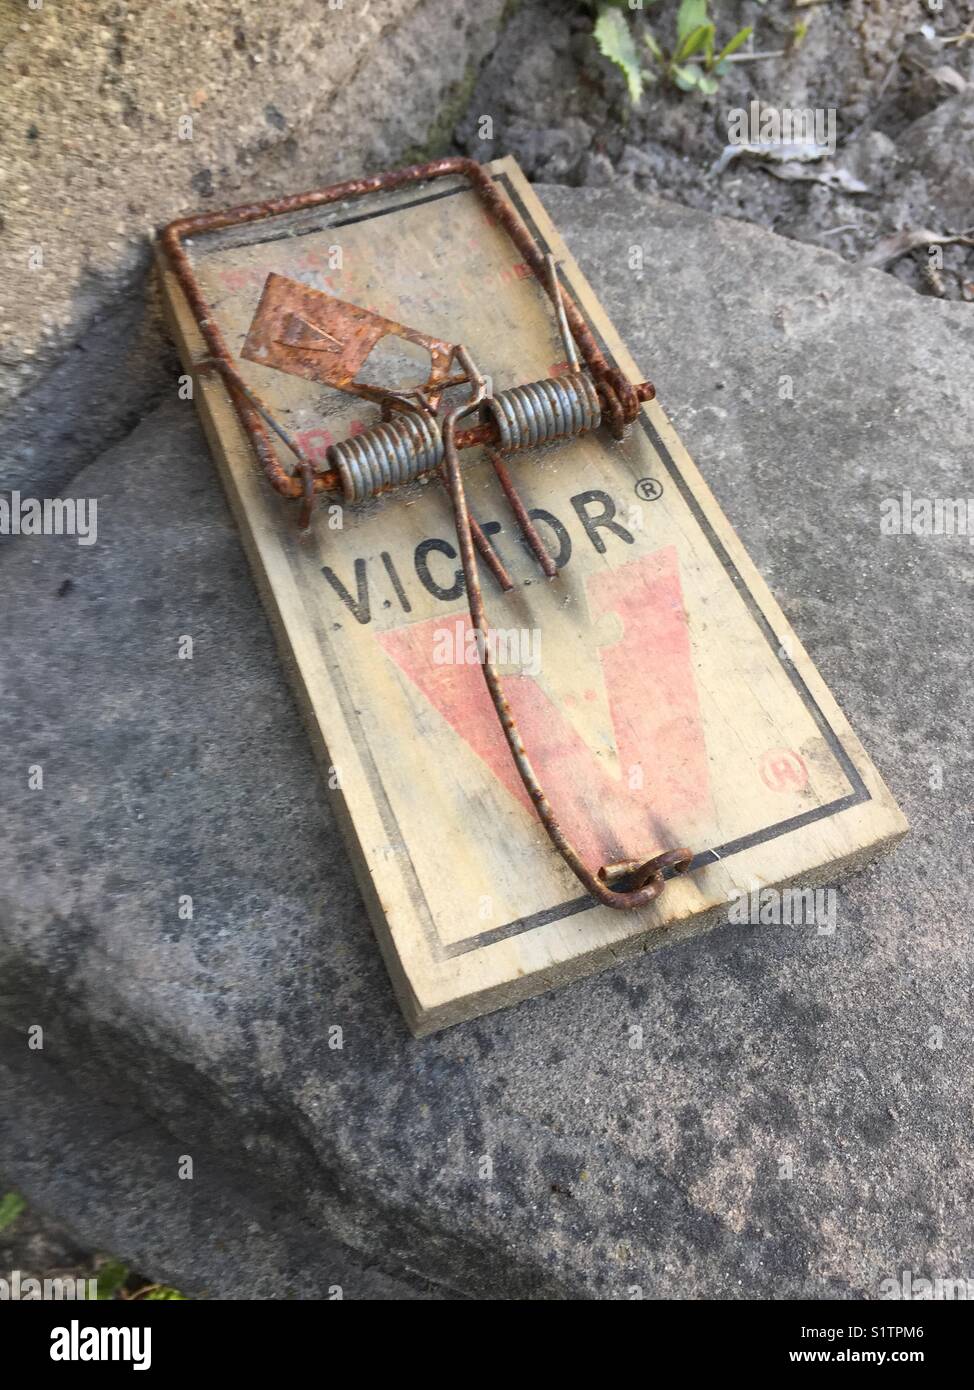 A rusted metal mouse trap Stock Photo - Alamy